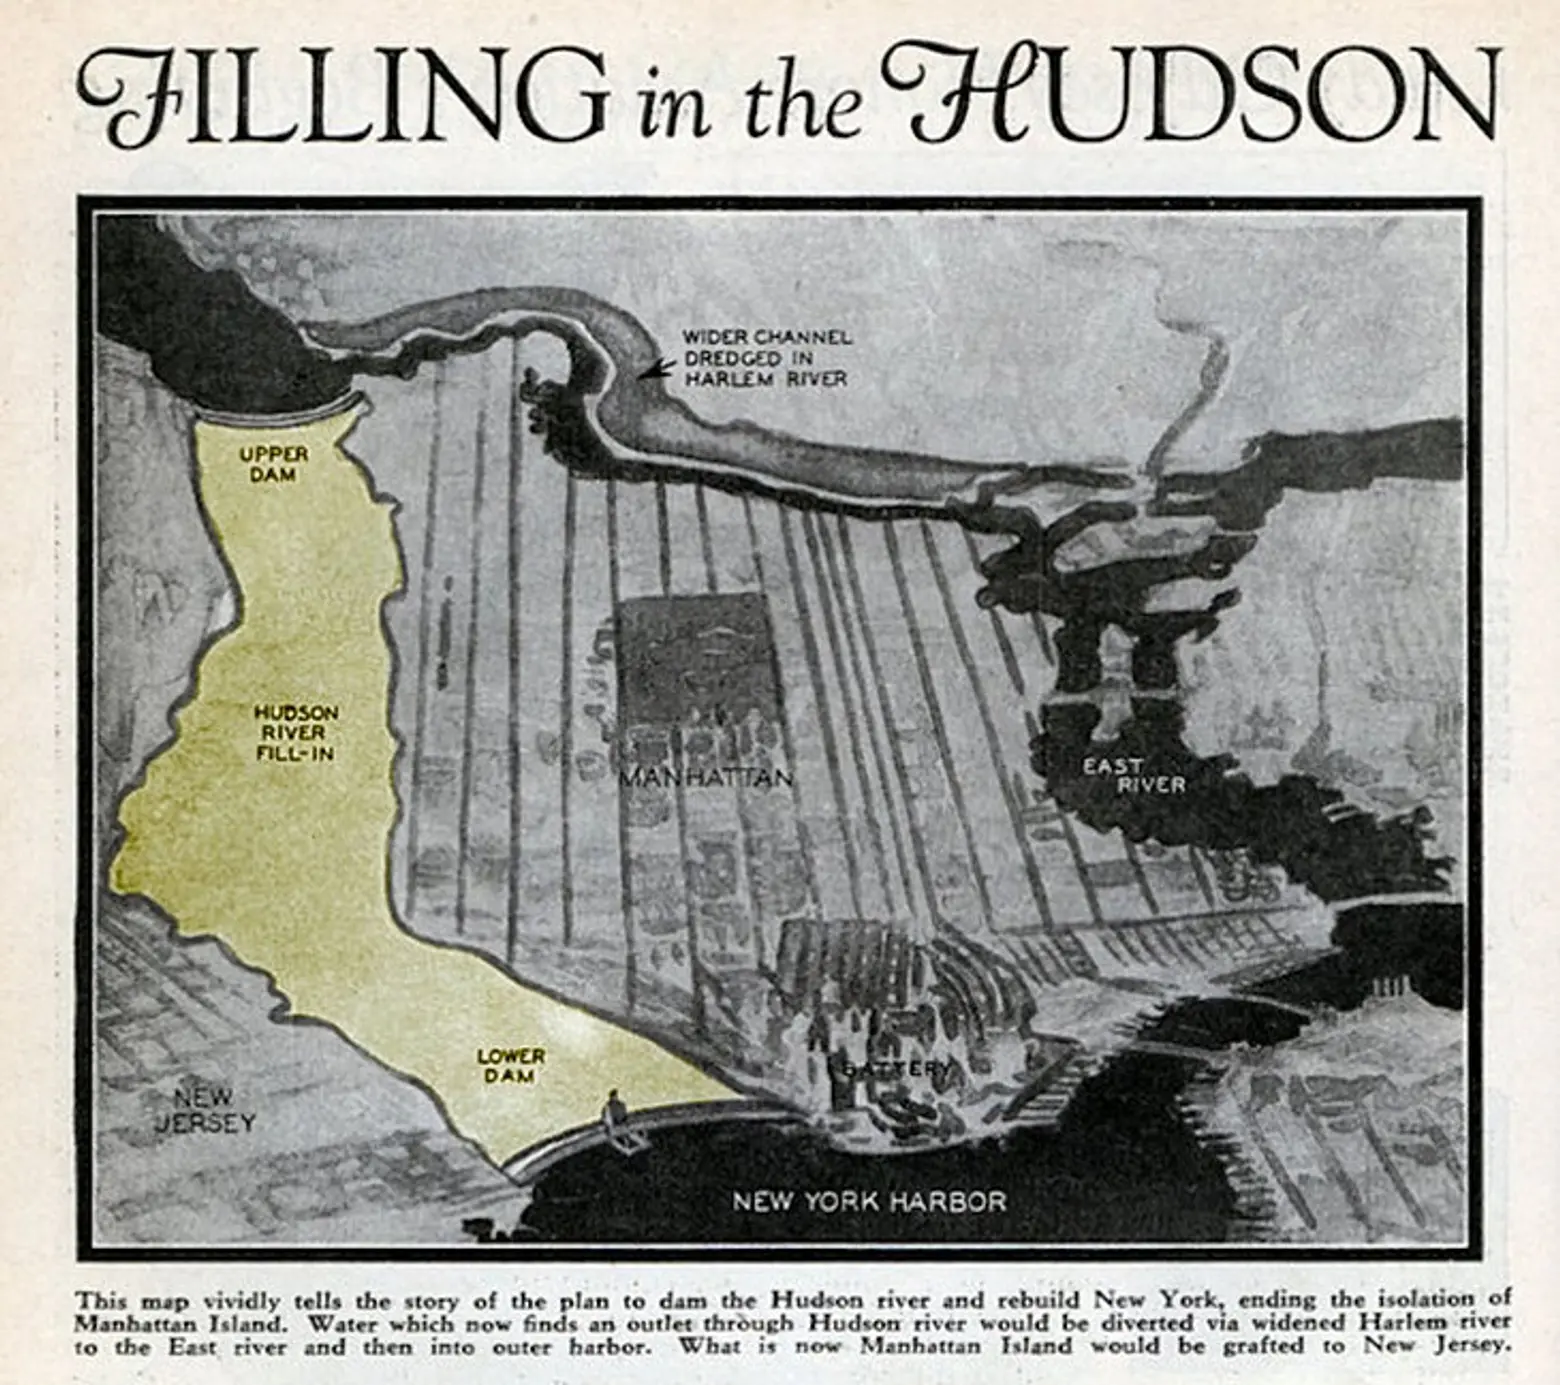 A 1934 engineer’s plan fills in the Hudson River for traffic and housing